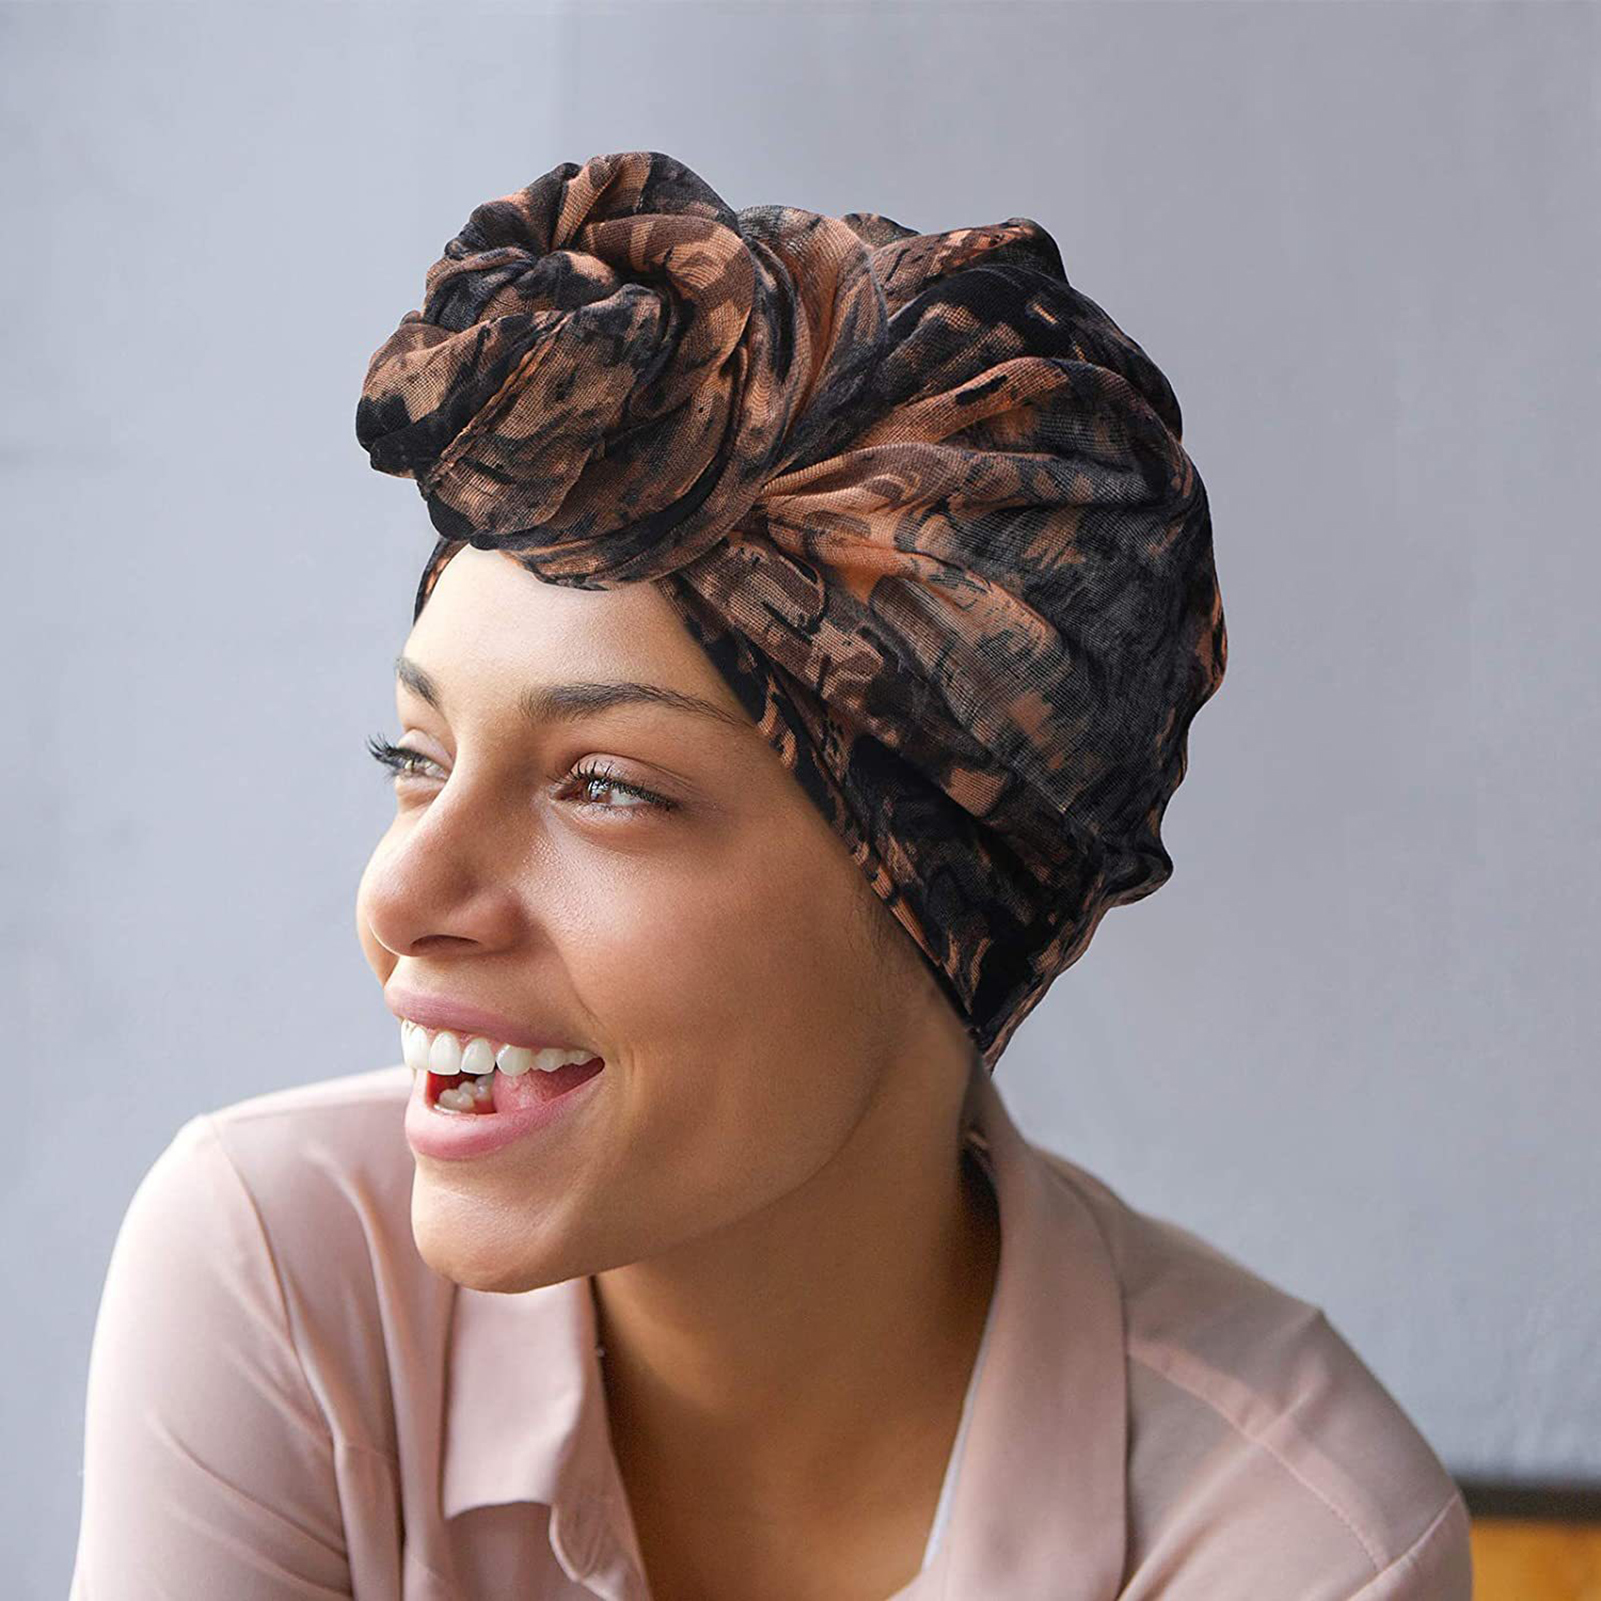 Hesroicy Long Breathable Ultra Soft Turban Head Wrap Stretchy Elastic Full Coverage Floral Print Hair Wrap Scarf for Women - image 3 of 8